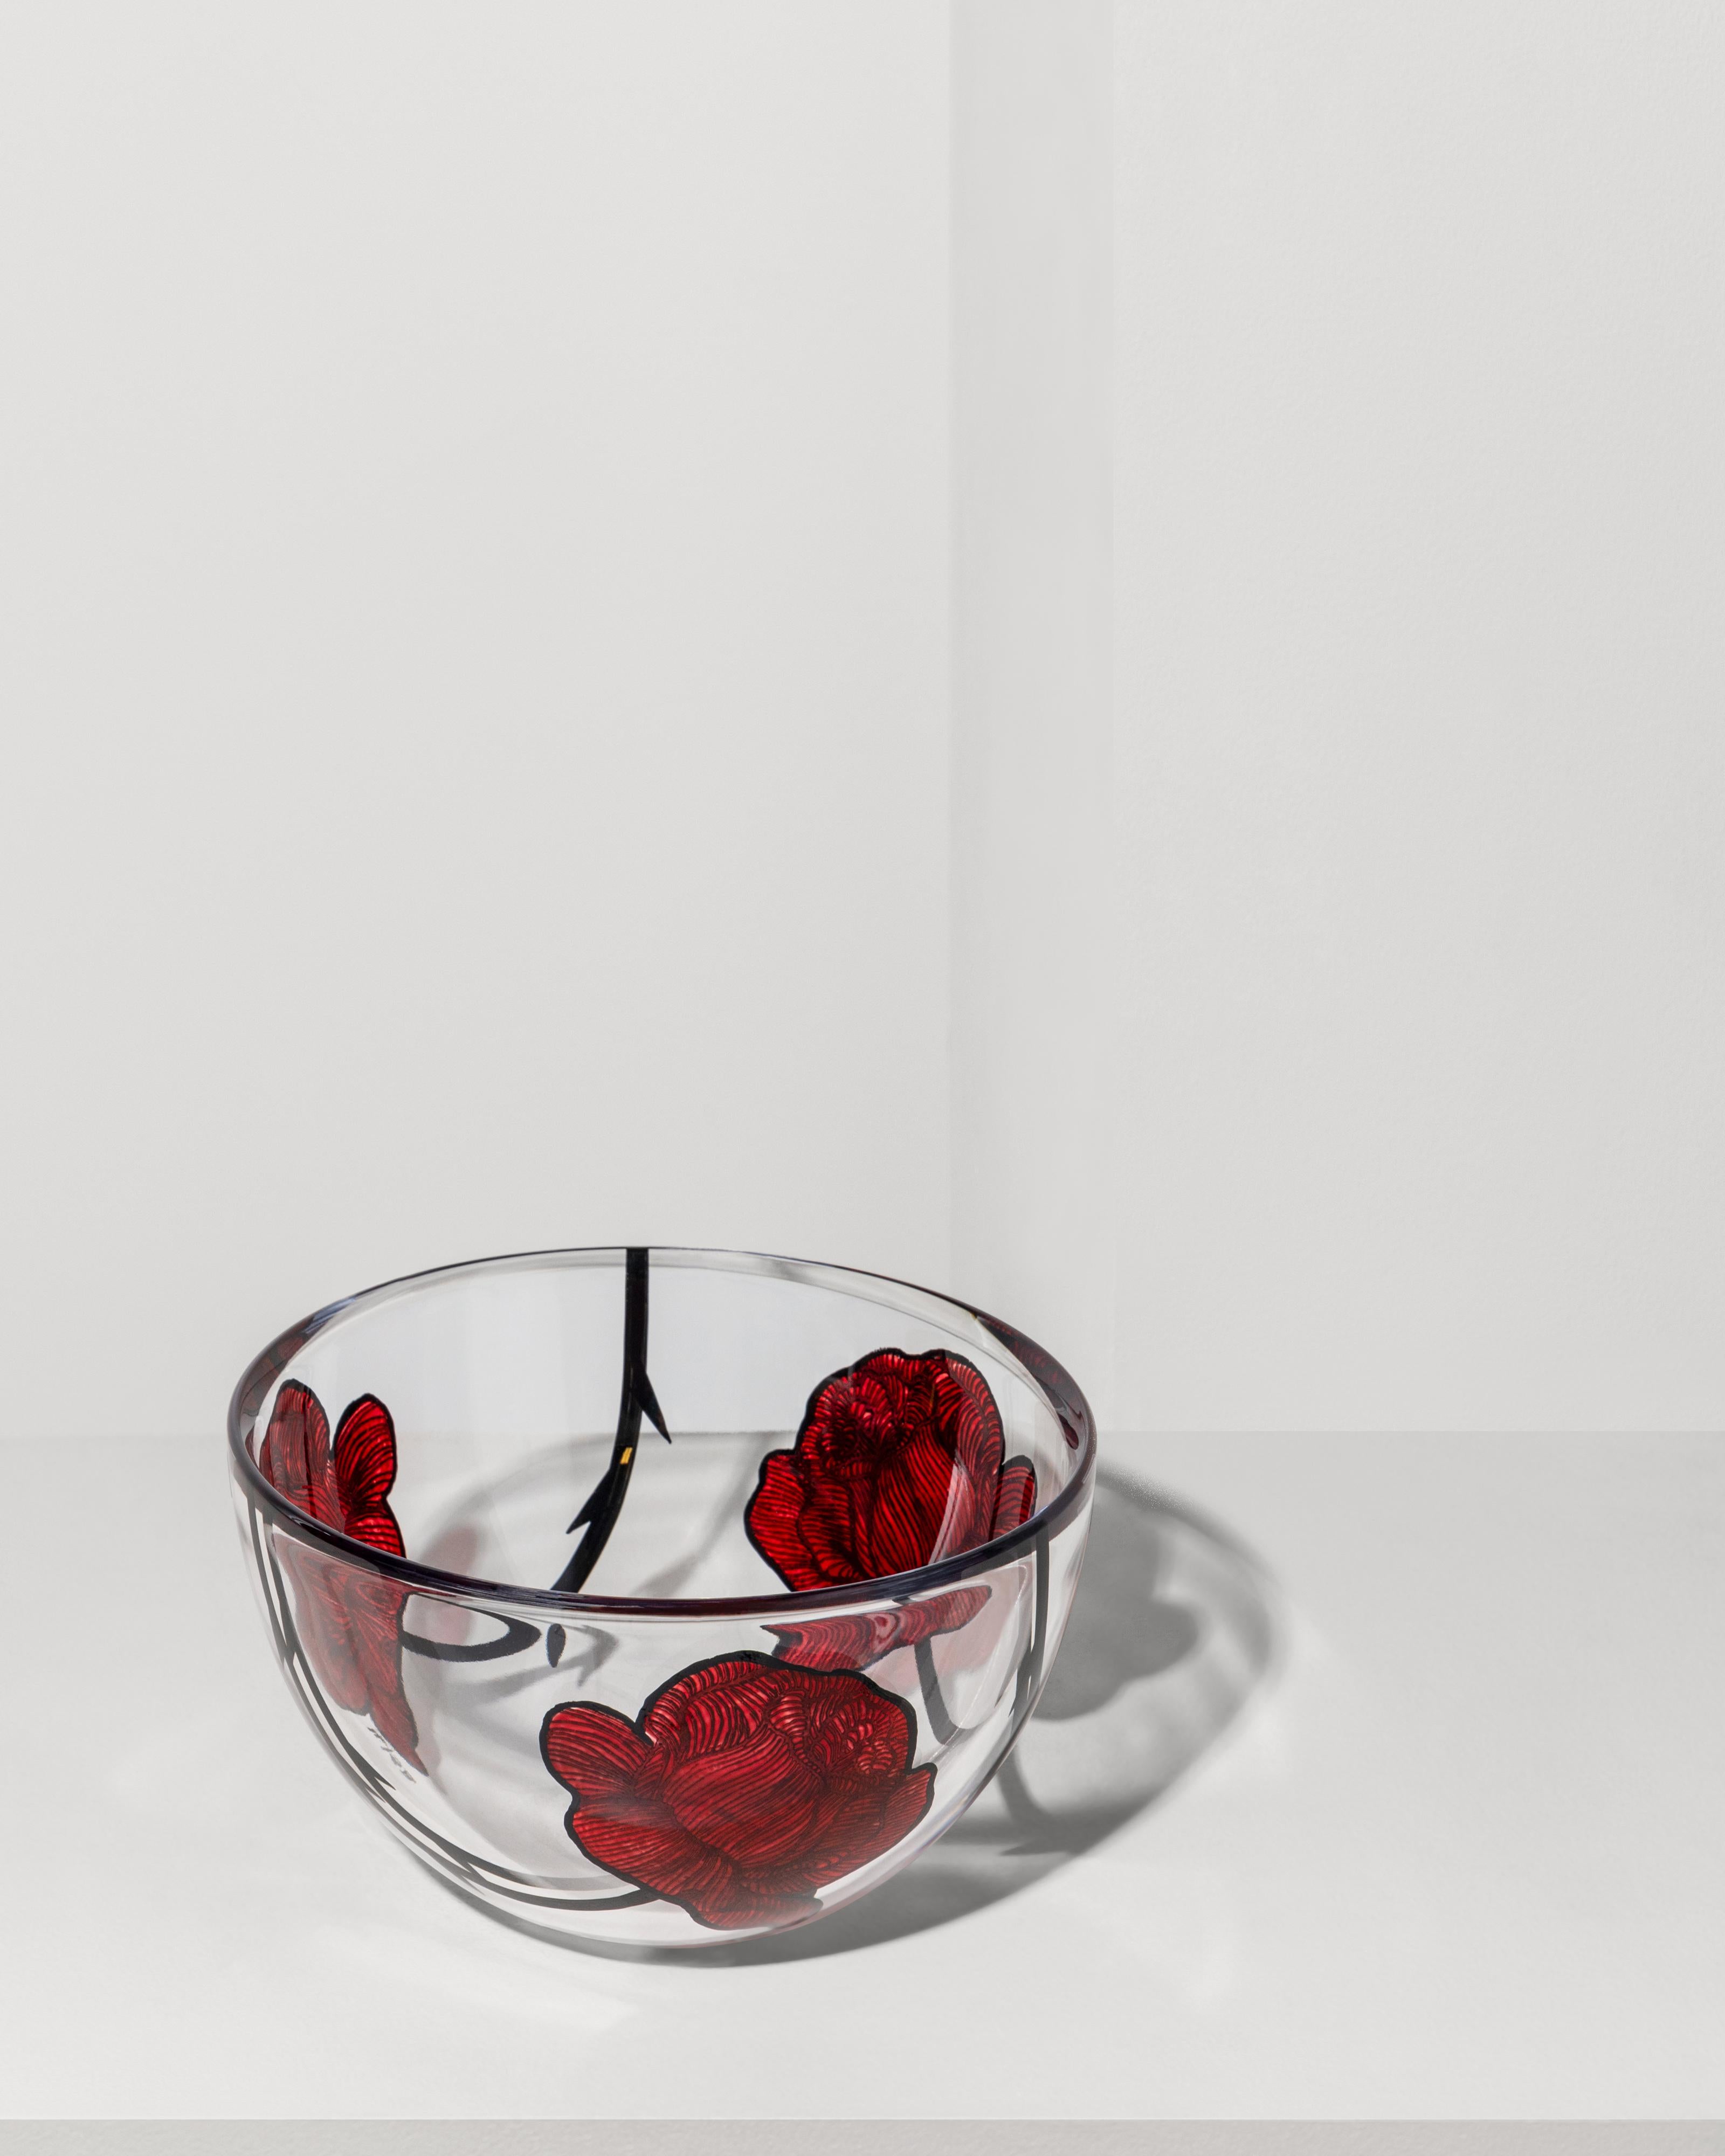 The Tattoo collection from Kosta Boda is inspired by tattoo art. The bowl is hand-painted in Kosta, Sweden, and offers a creative combination of romance and rock ‘n’ roll. Good things should last forever! Design by Ludvig Löfgren.
